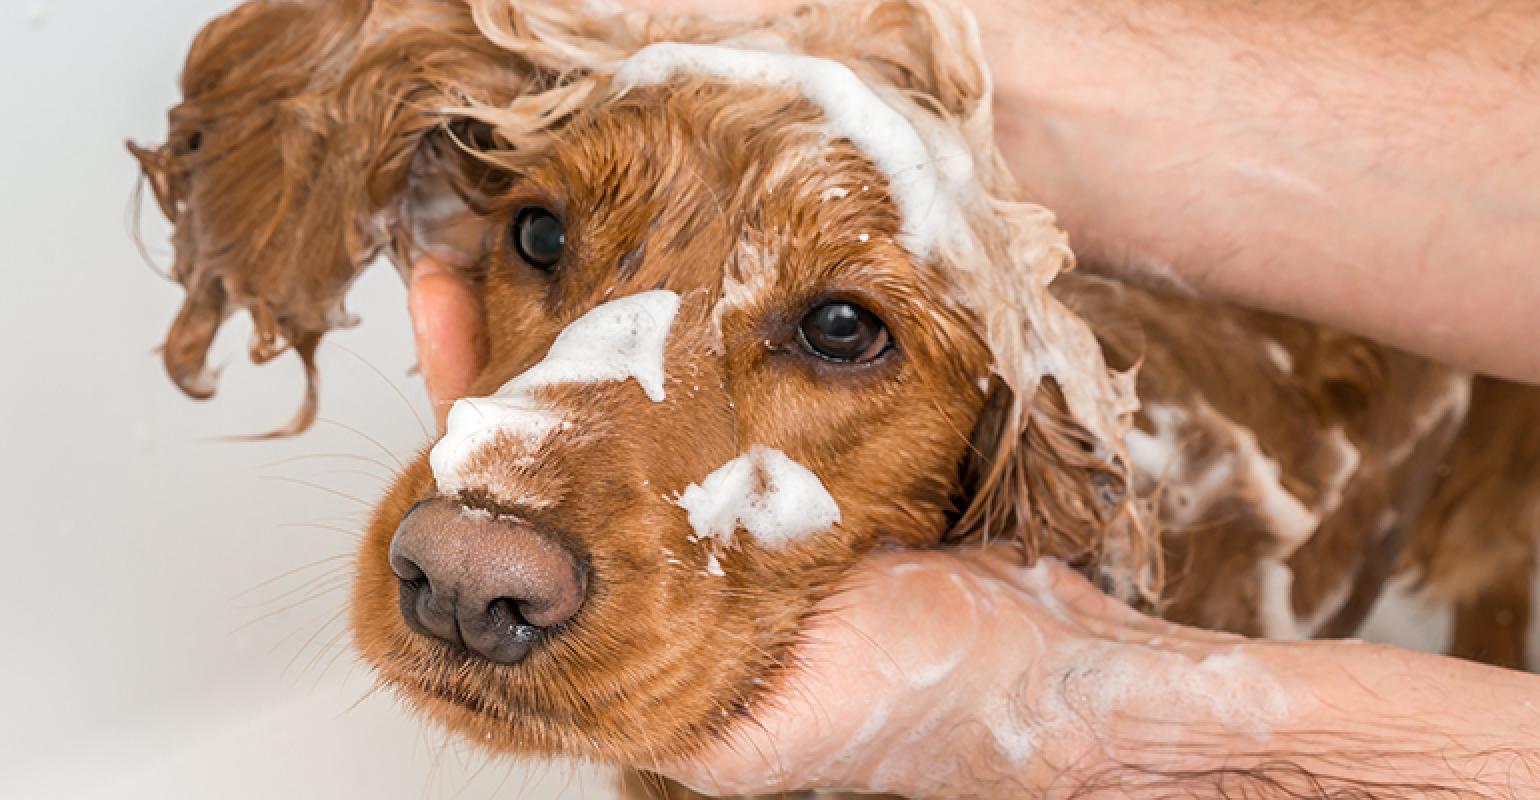 Increased pet grooming at home creates an opportunity for retailers |  Supermarket News